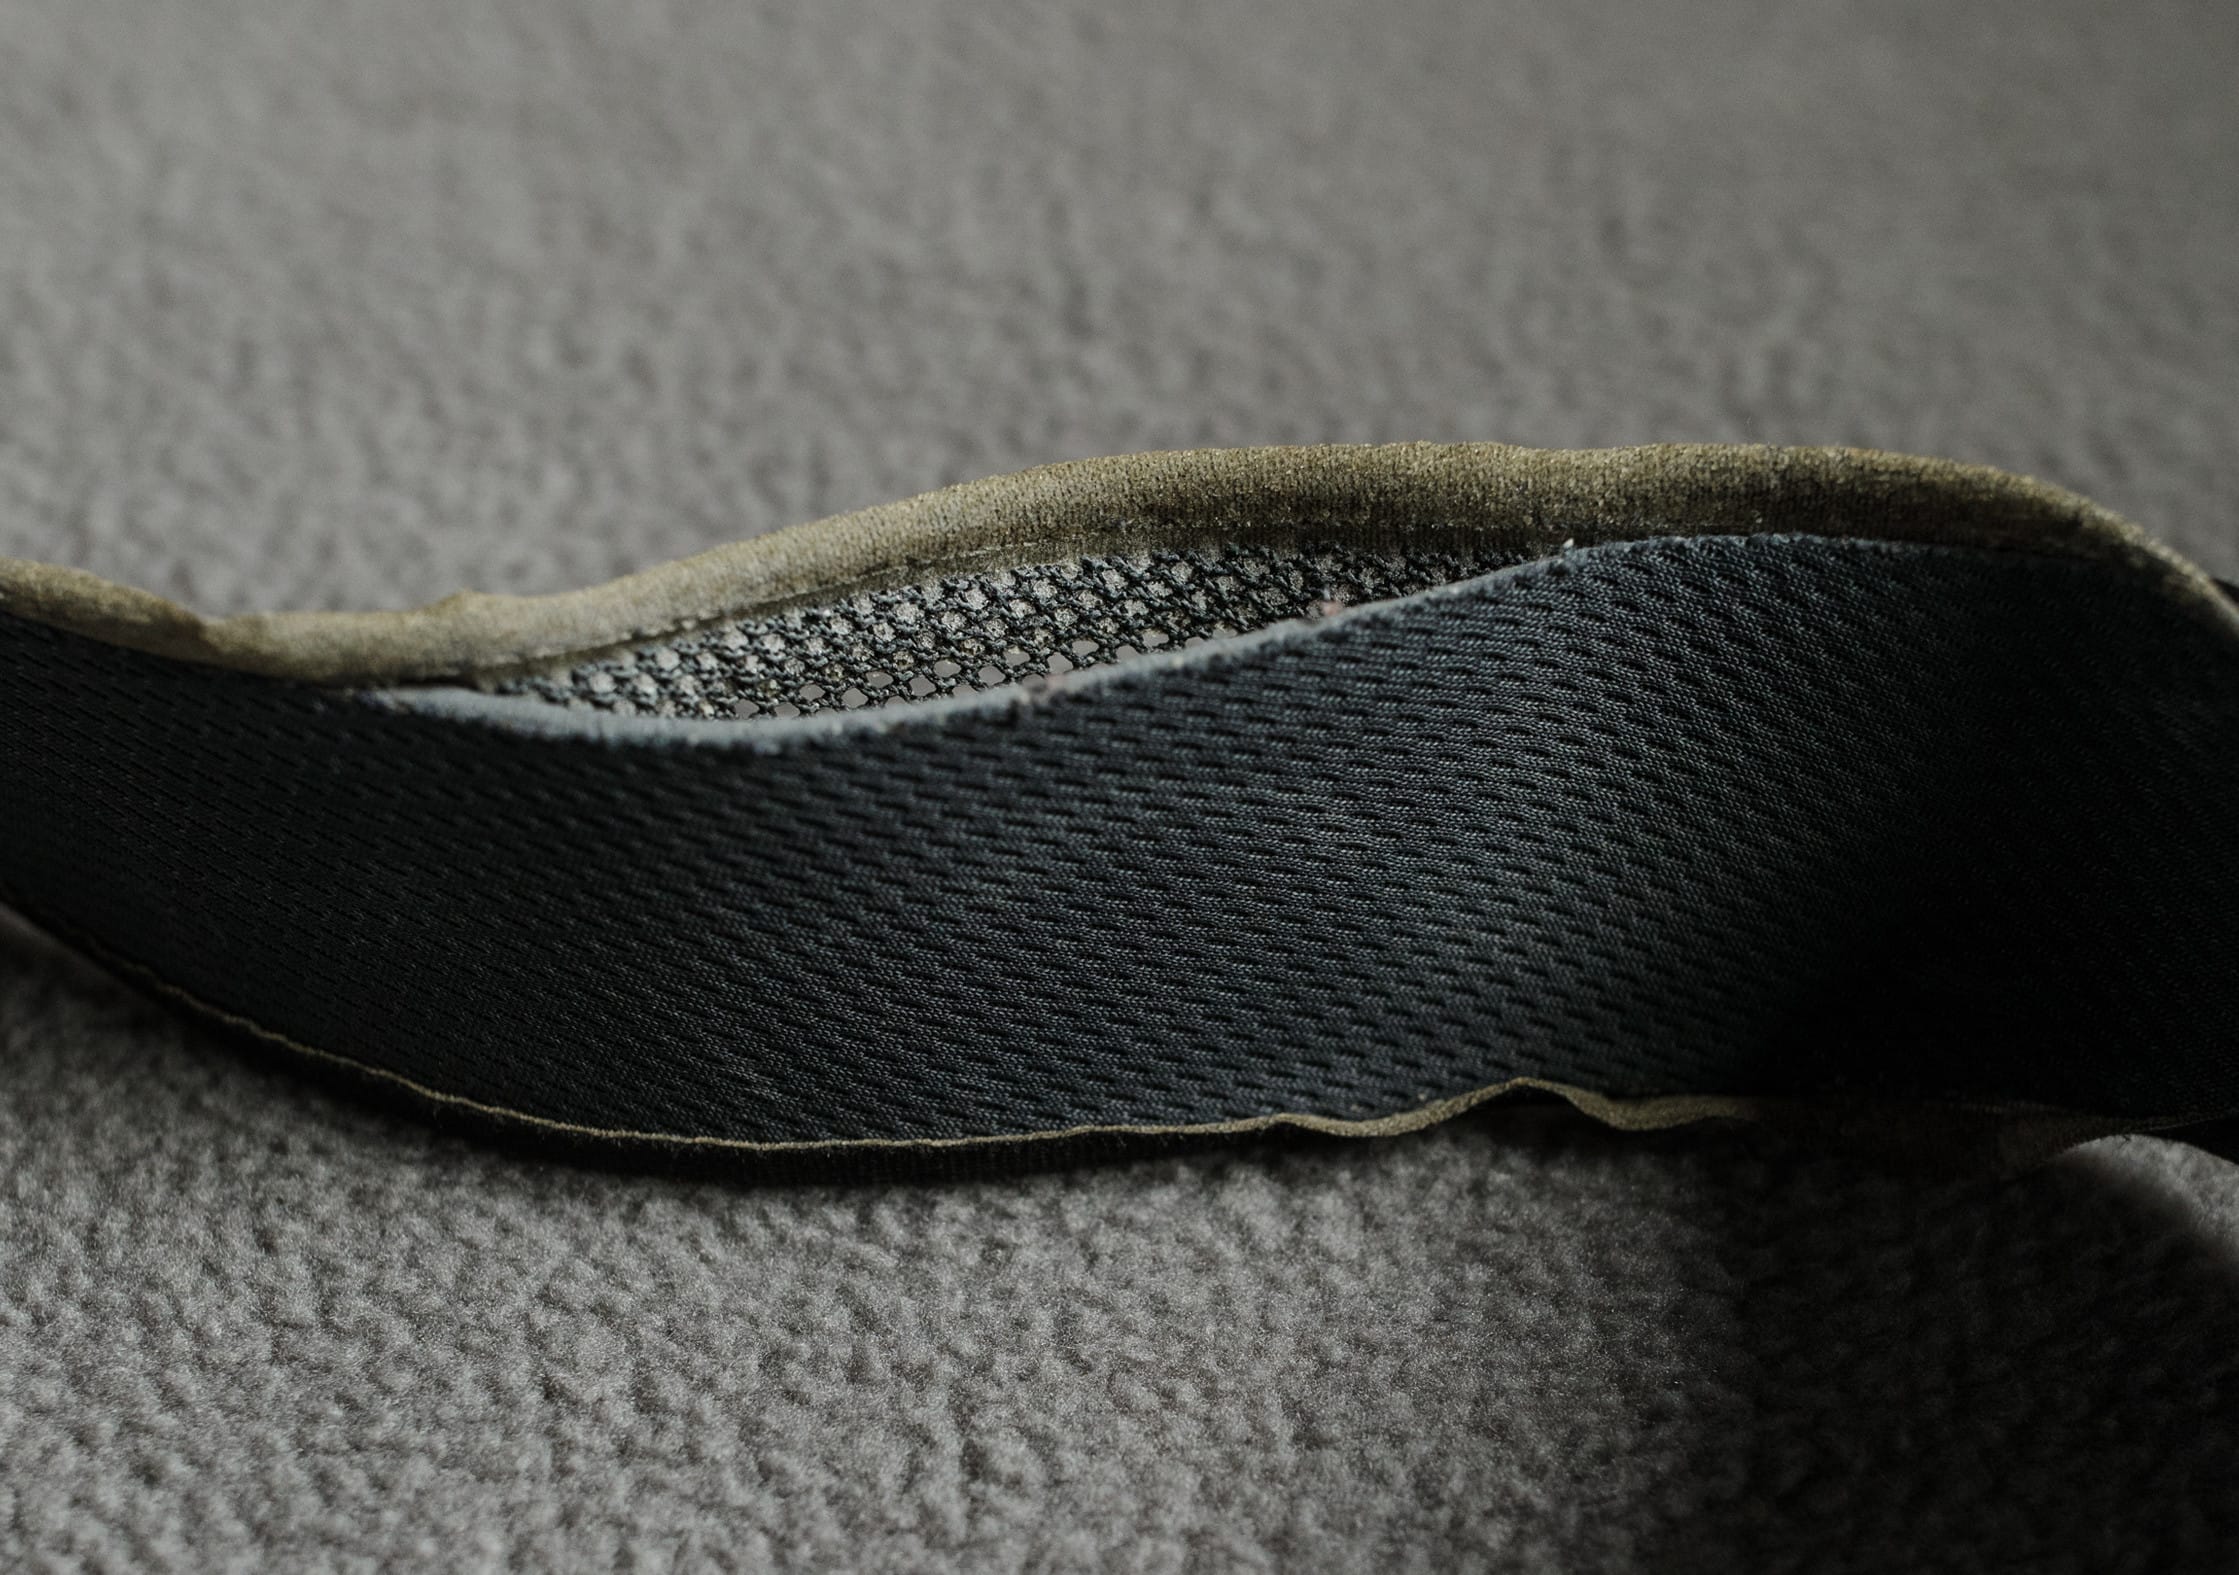 Joby UltraFit Sling Strap 2 years of use